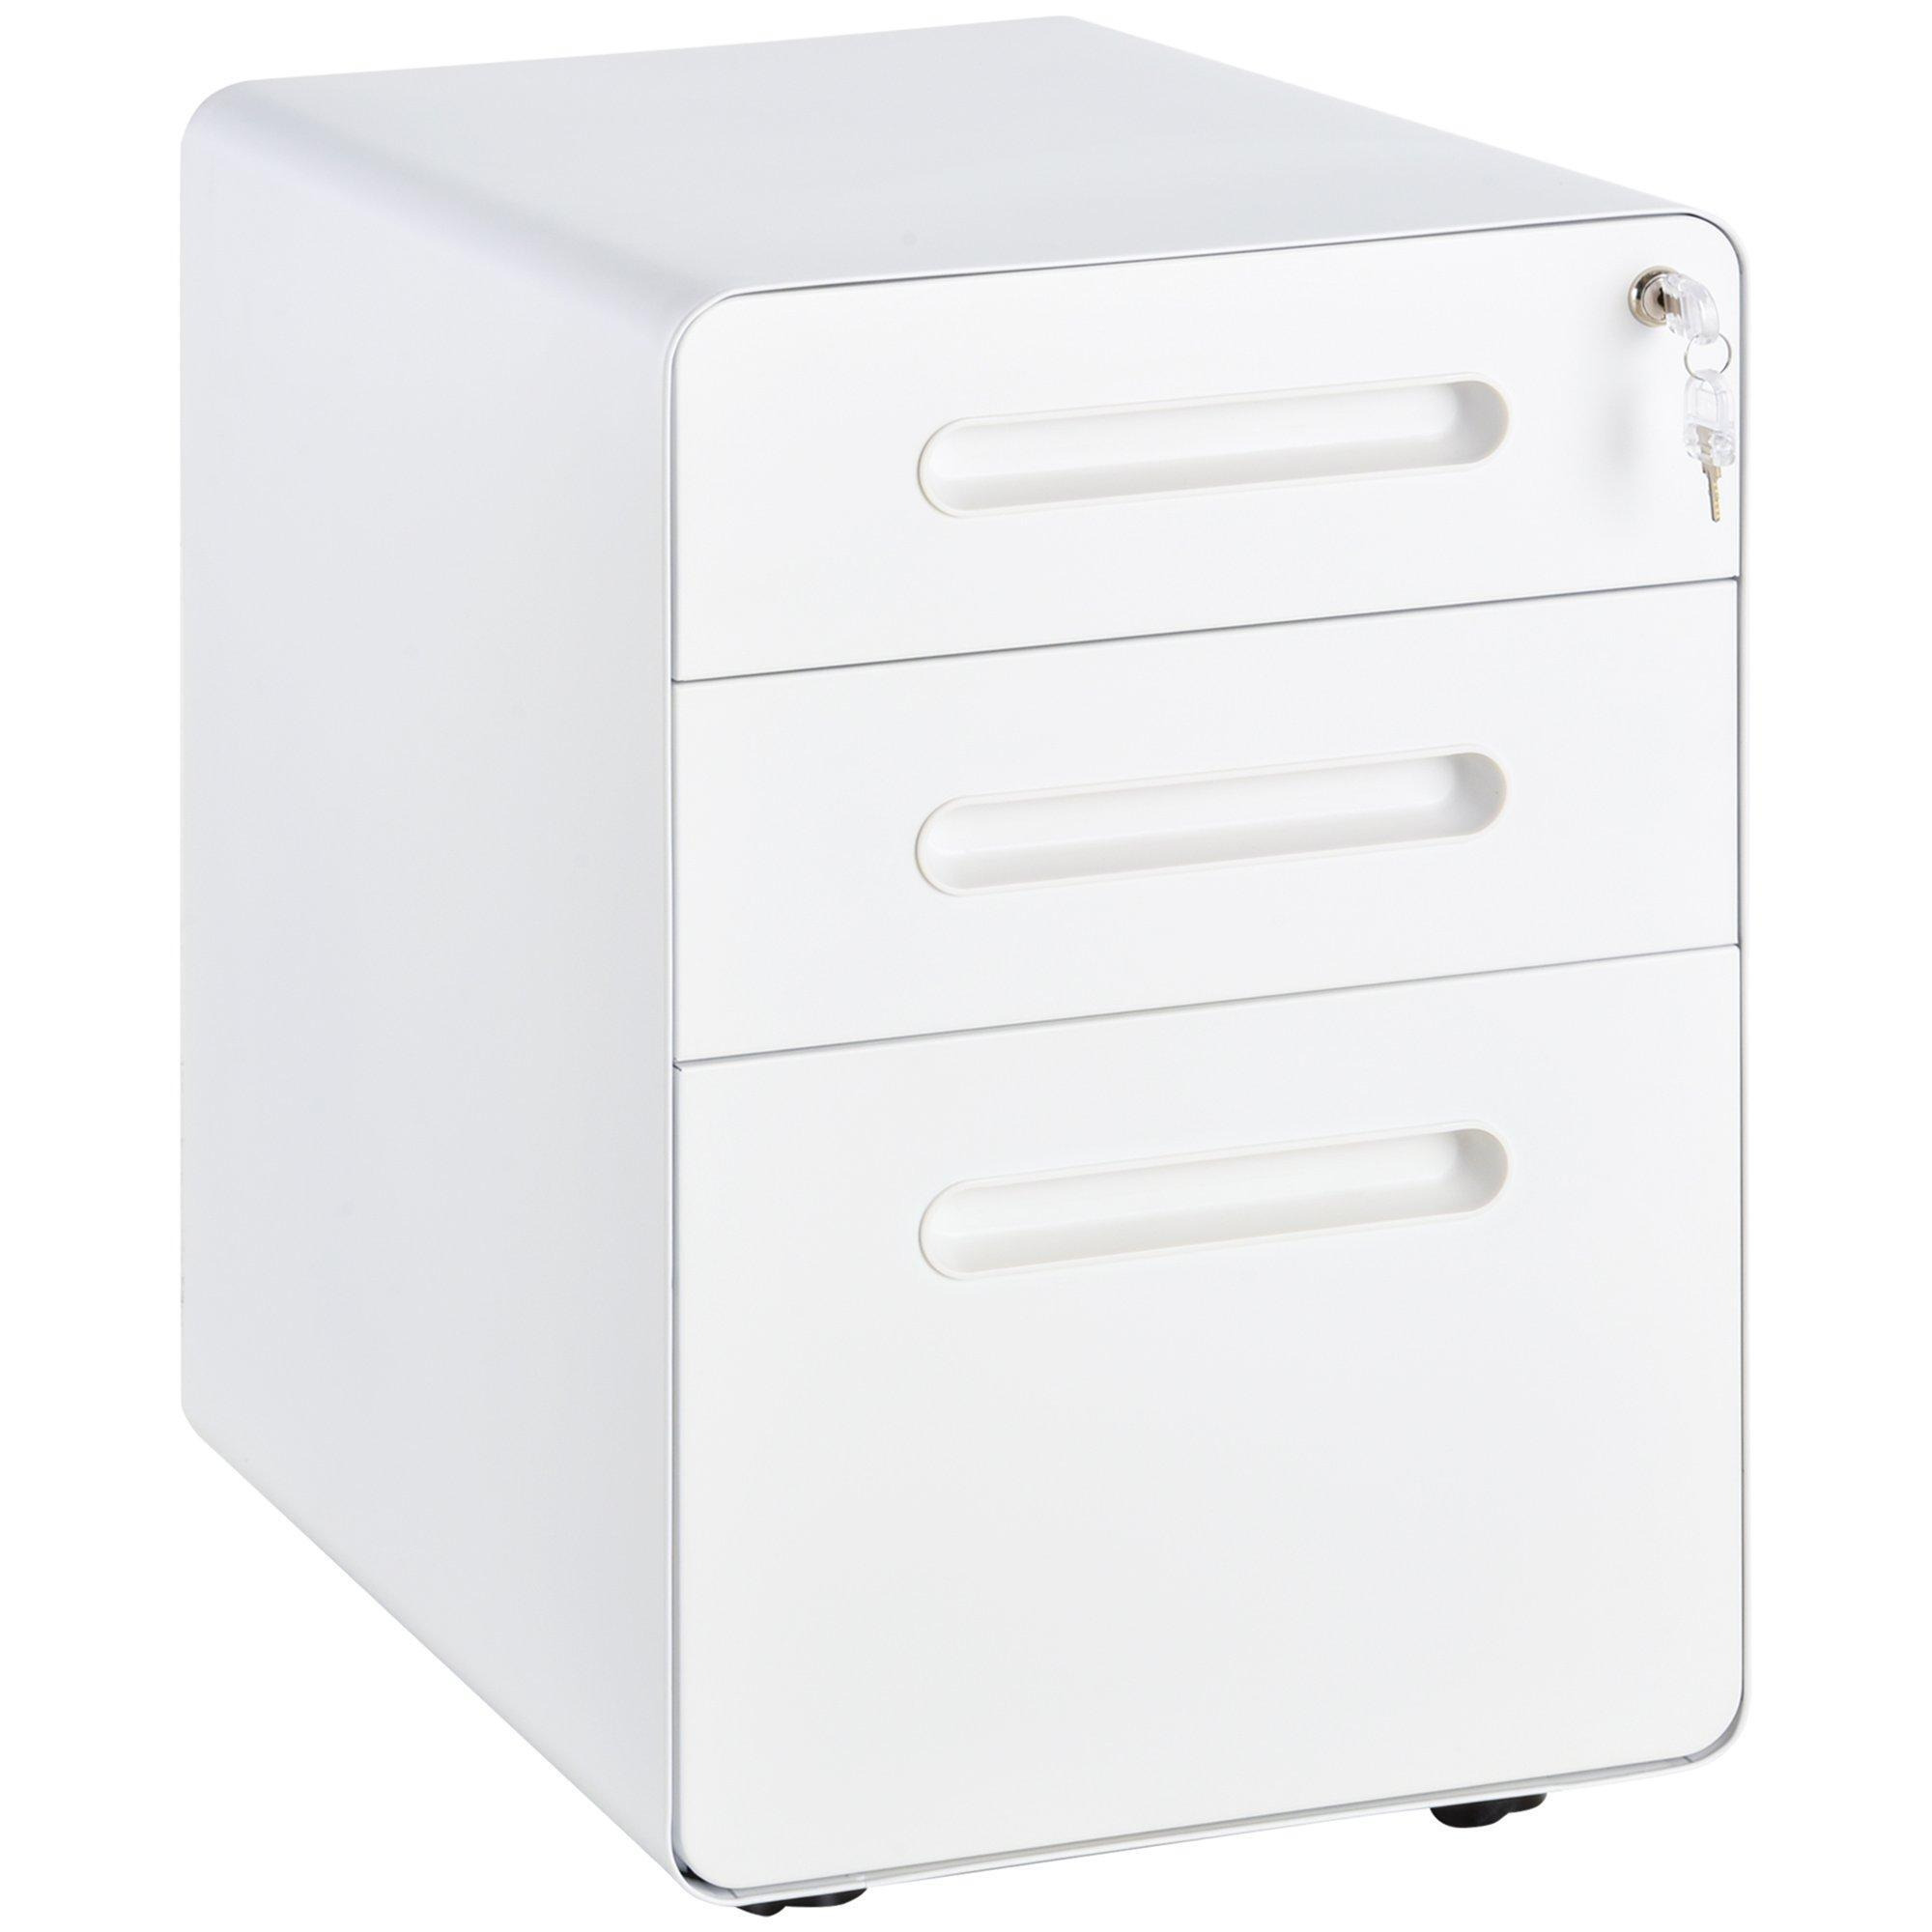 3 Drawer Modern Steel Filing Cabinet with 4 Wheels Lock Pencil Box - image 1